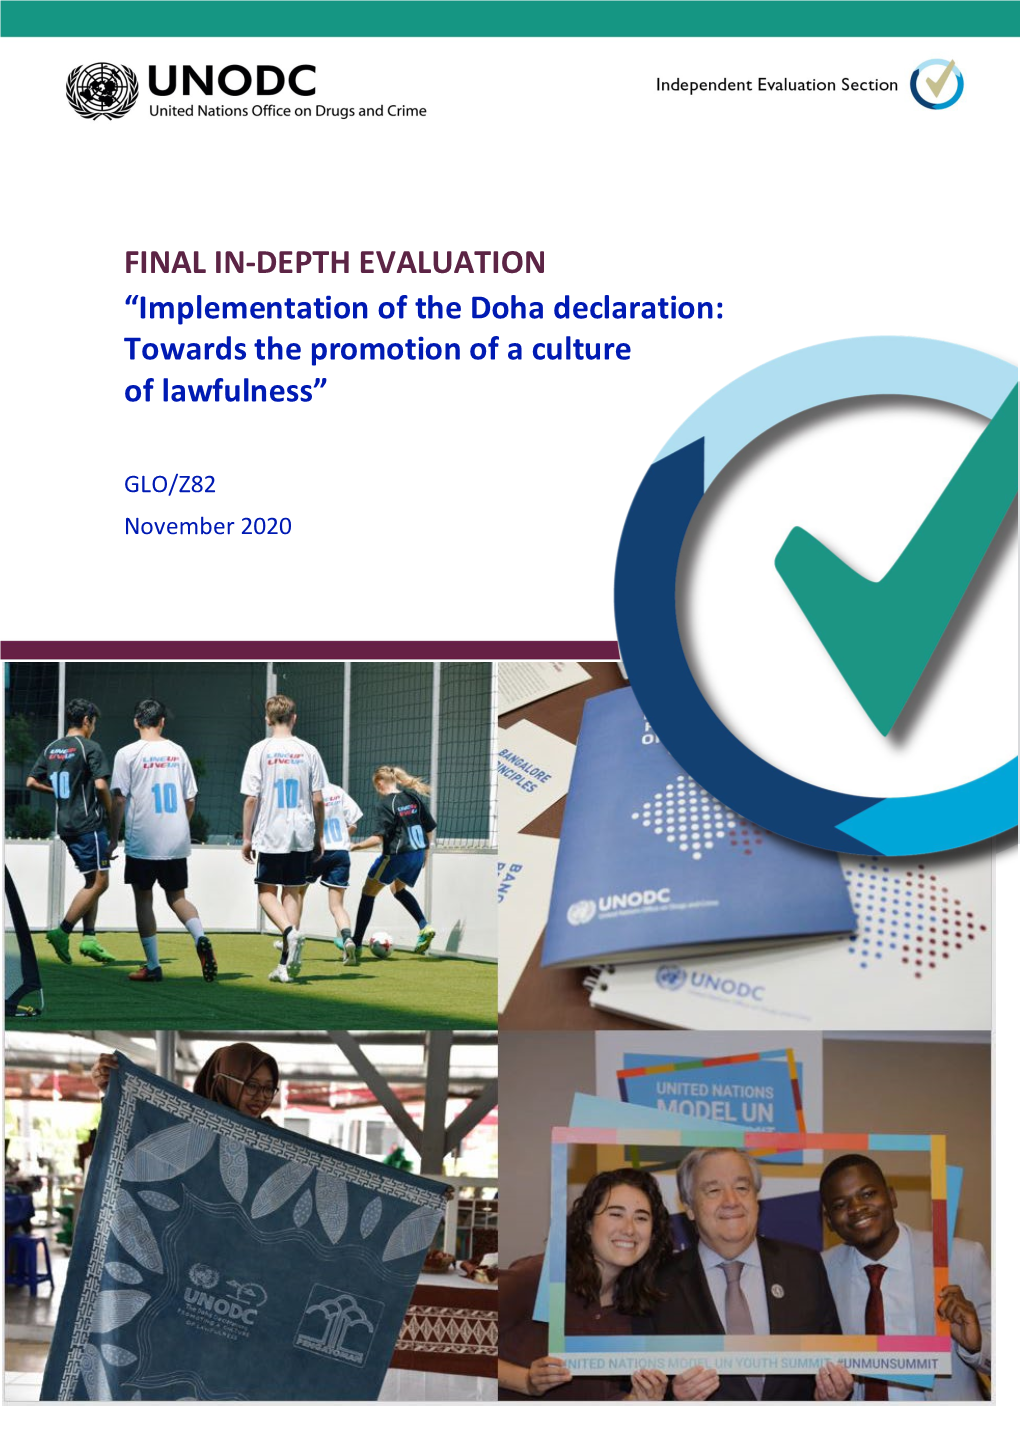 FINAL IN-DEPTH EVALUATION “Implementation of the Doha Declaration: Towards the Promotion of a Culture of Lawfulness”